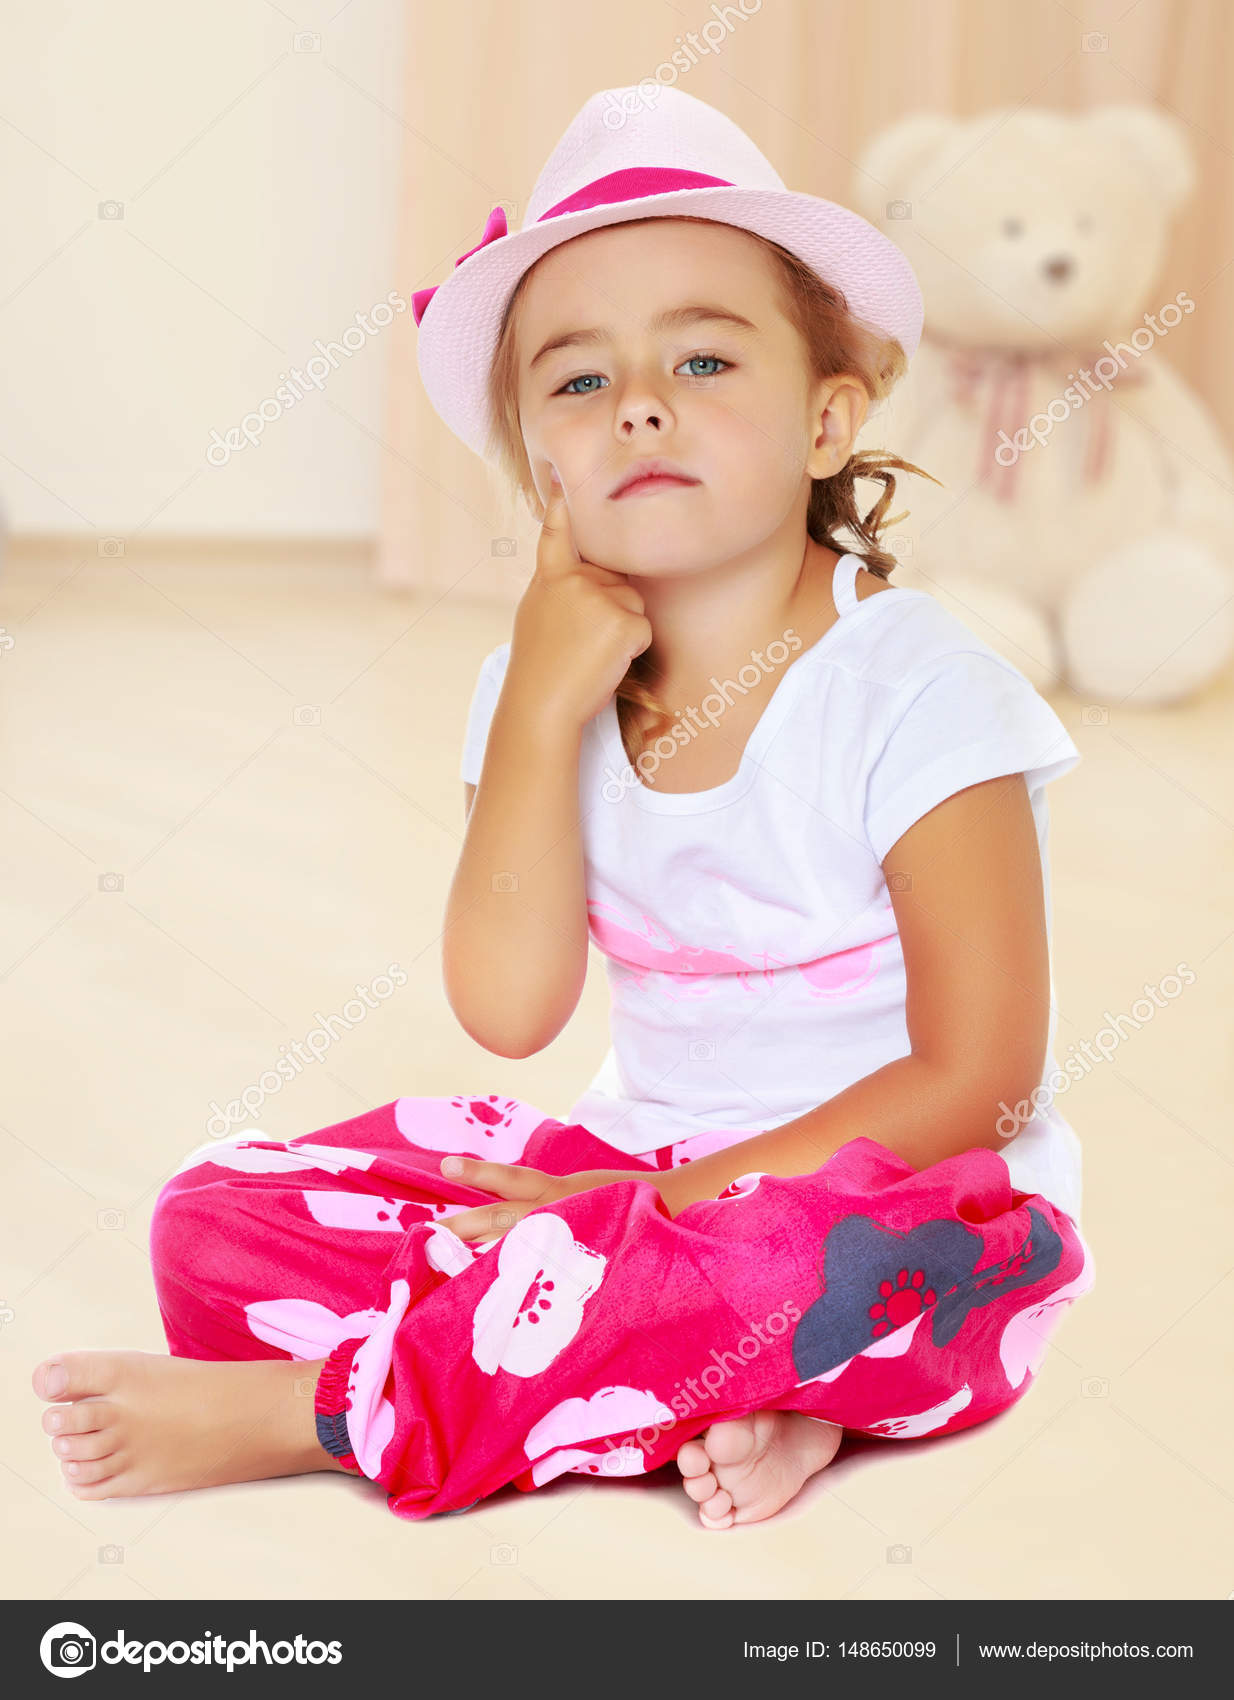 Tanned little girl in a hat — Stock Photo © lotosfoto1 #148650099